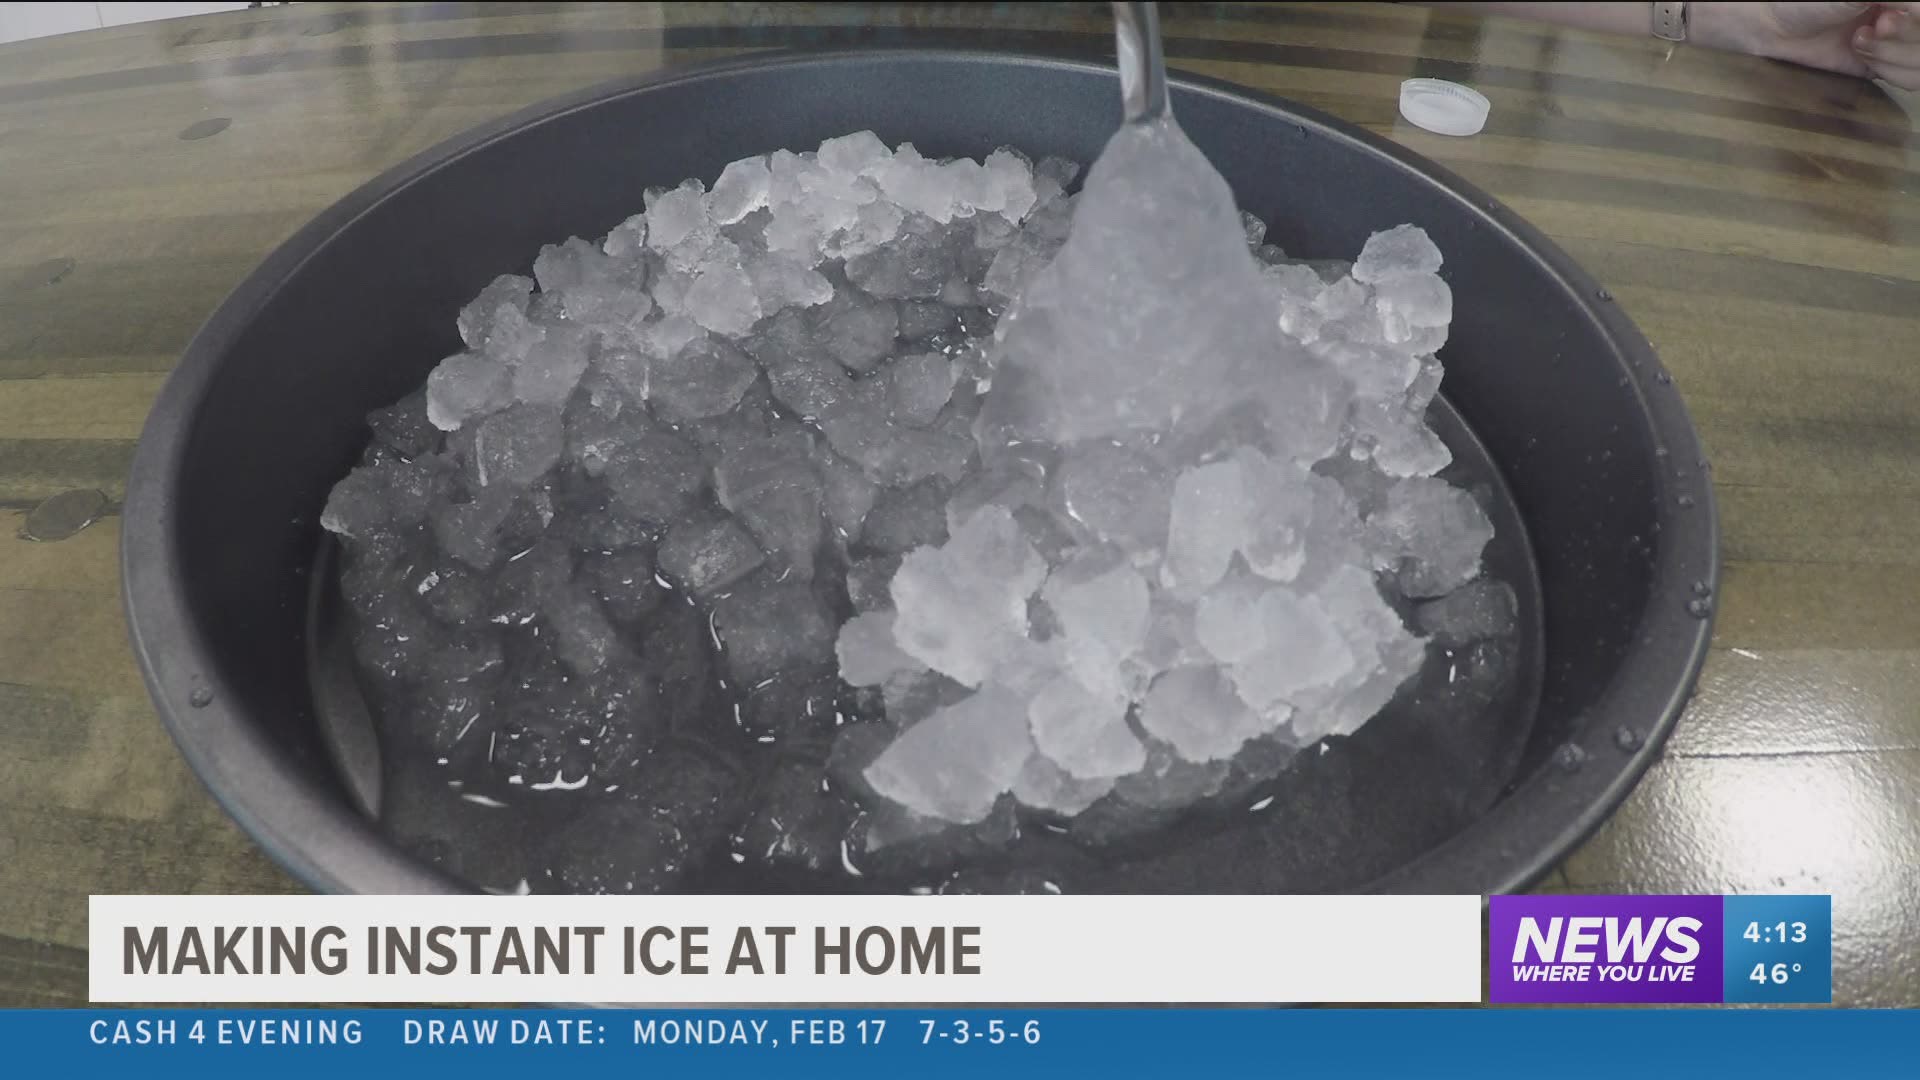 In this simple experiment, you can use ice, water bottles, and a freezer to create "instant ice". Very cold water will interact with the ice cubes to grow.